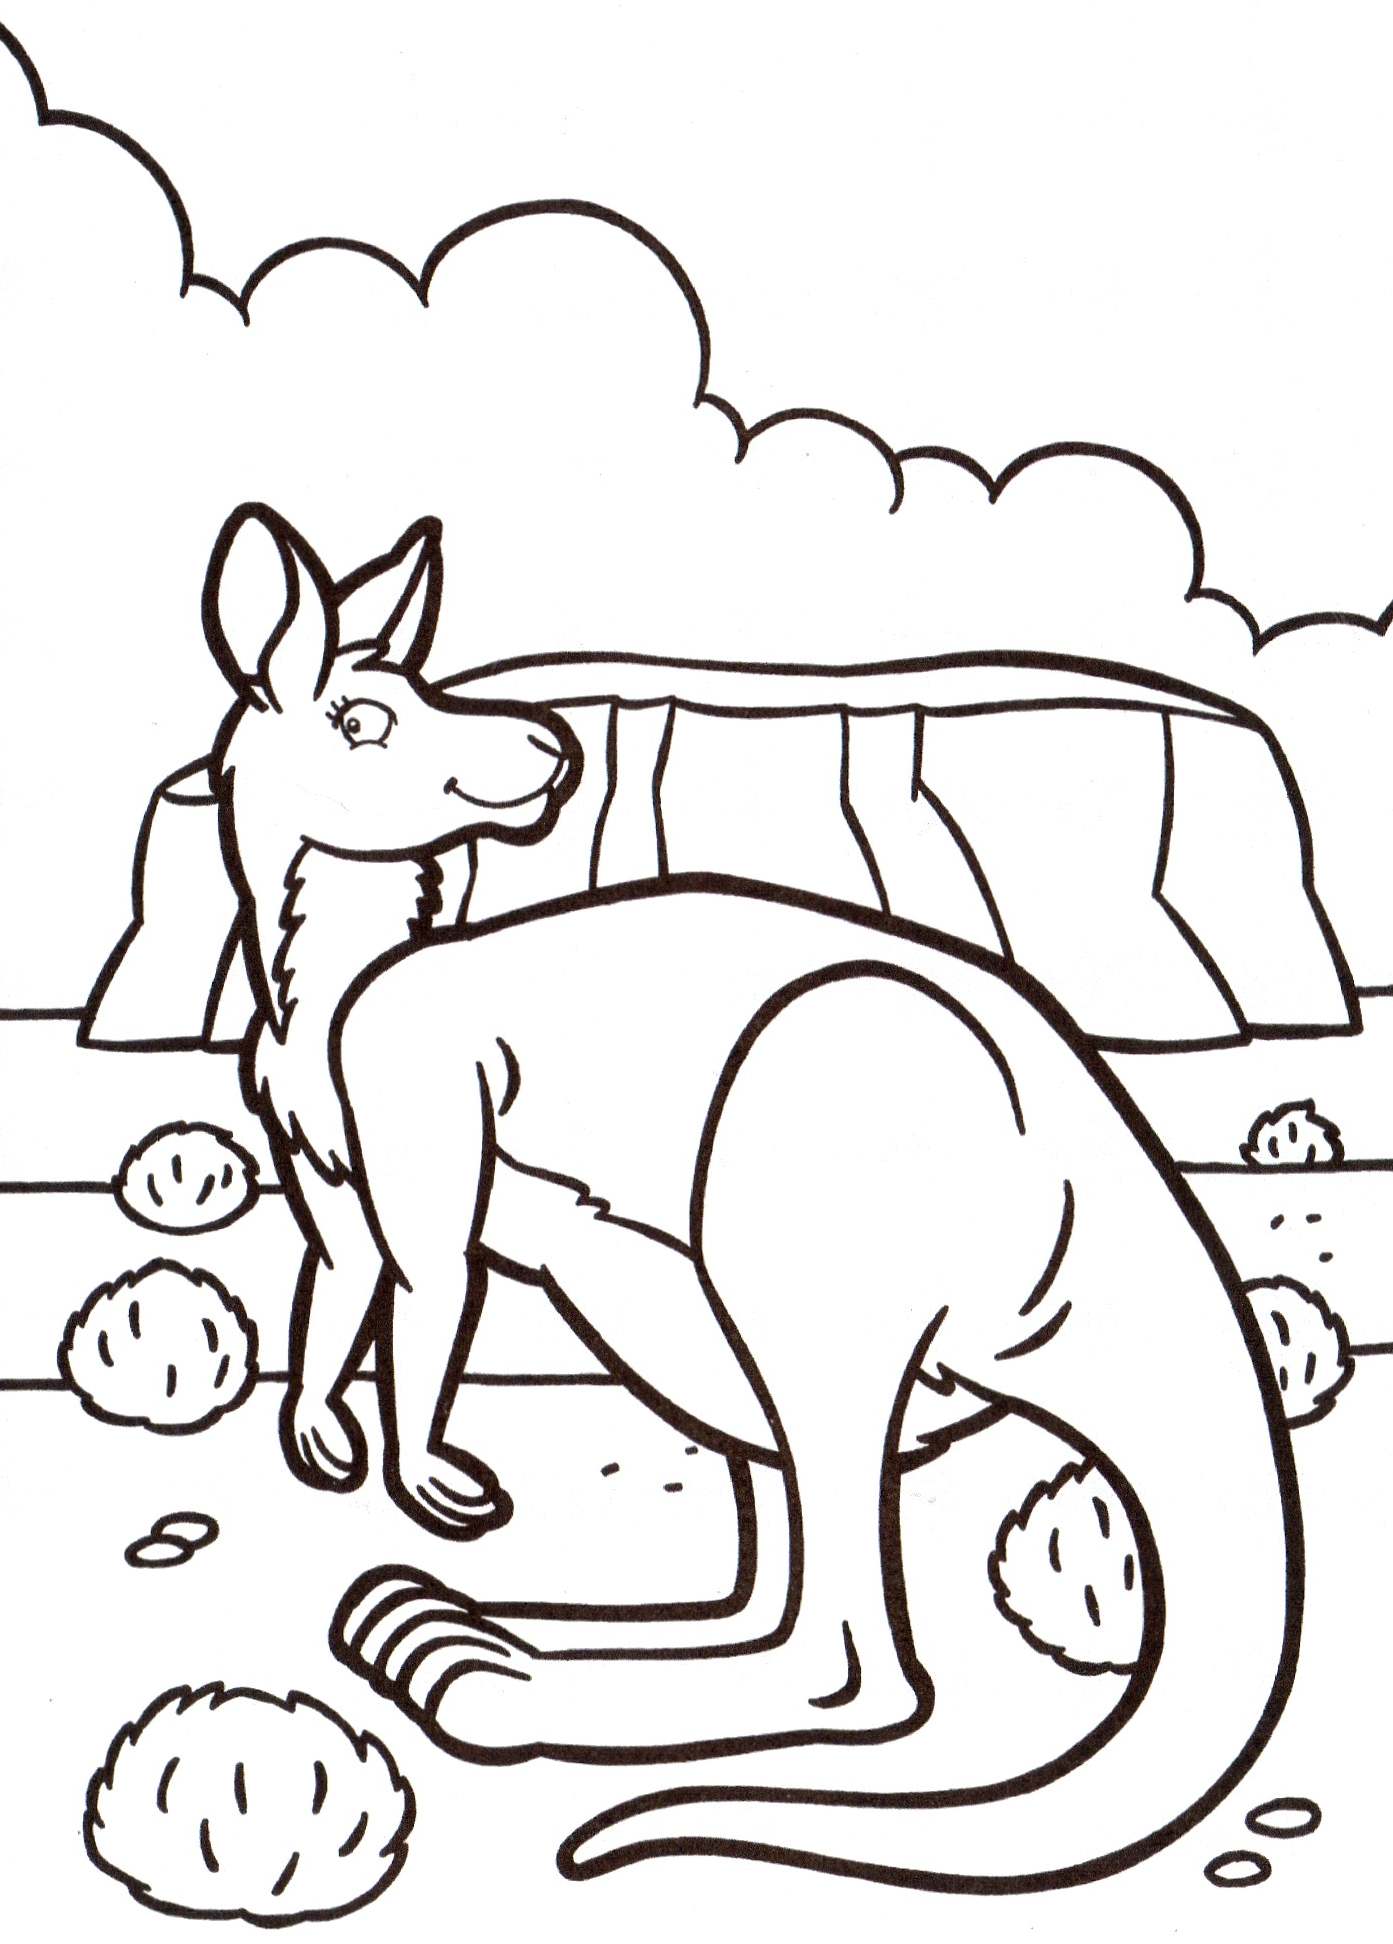 Kangaroo in australia   Animal Coloring pages for kids to print ...